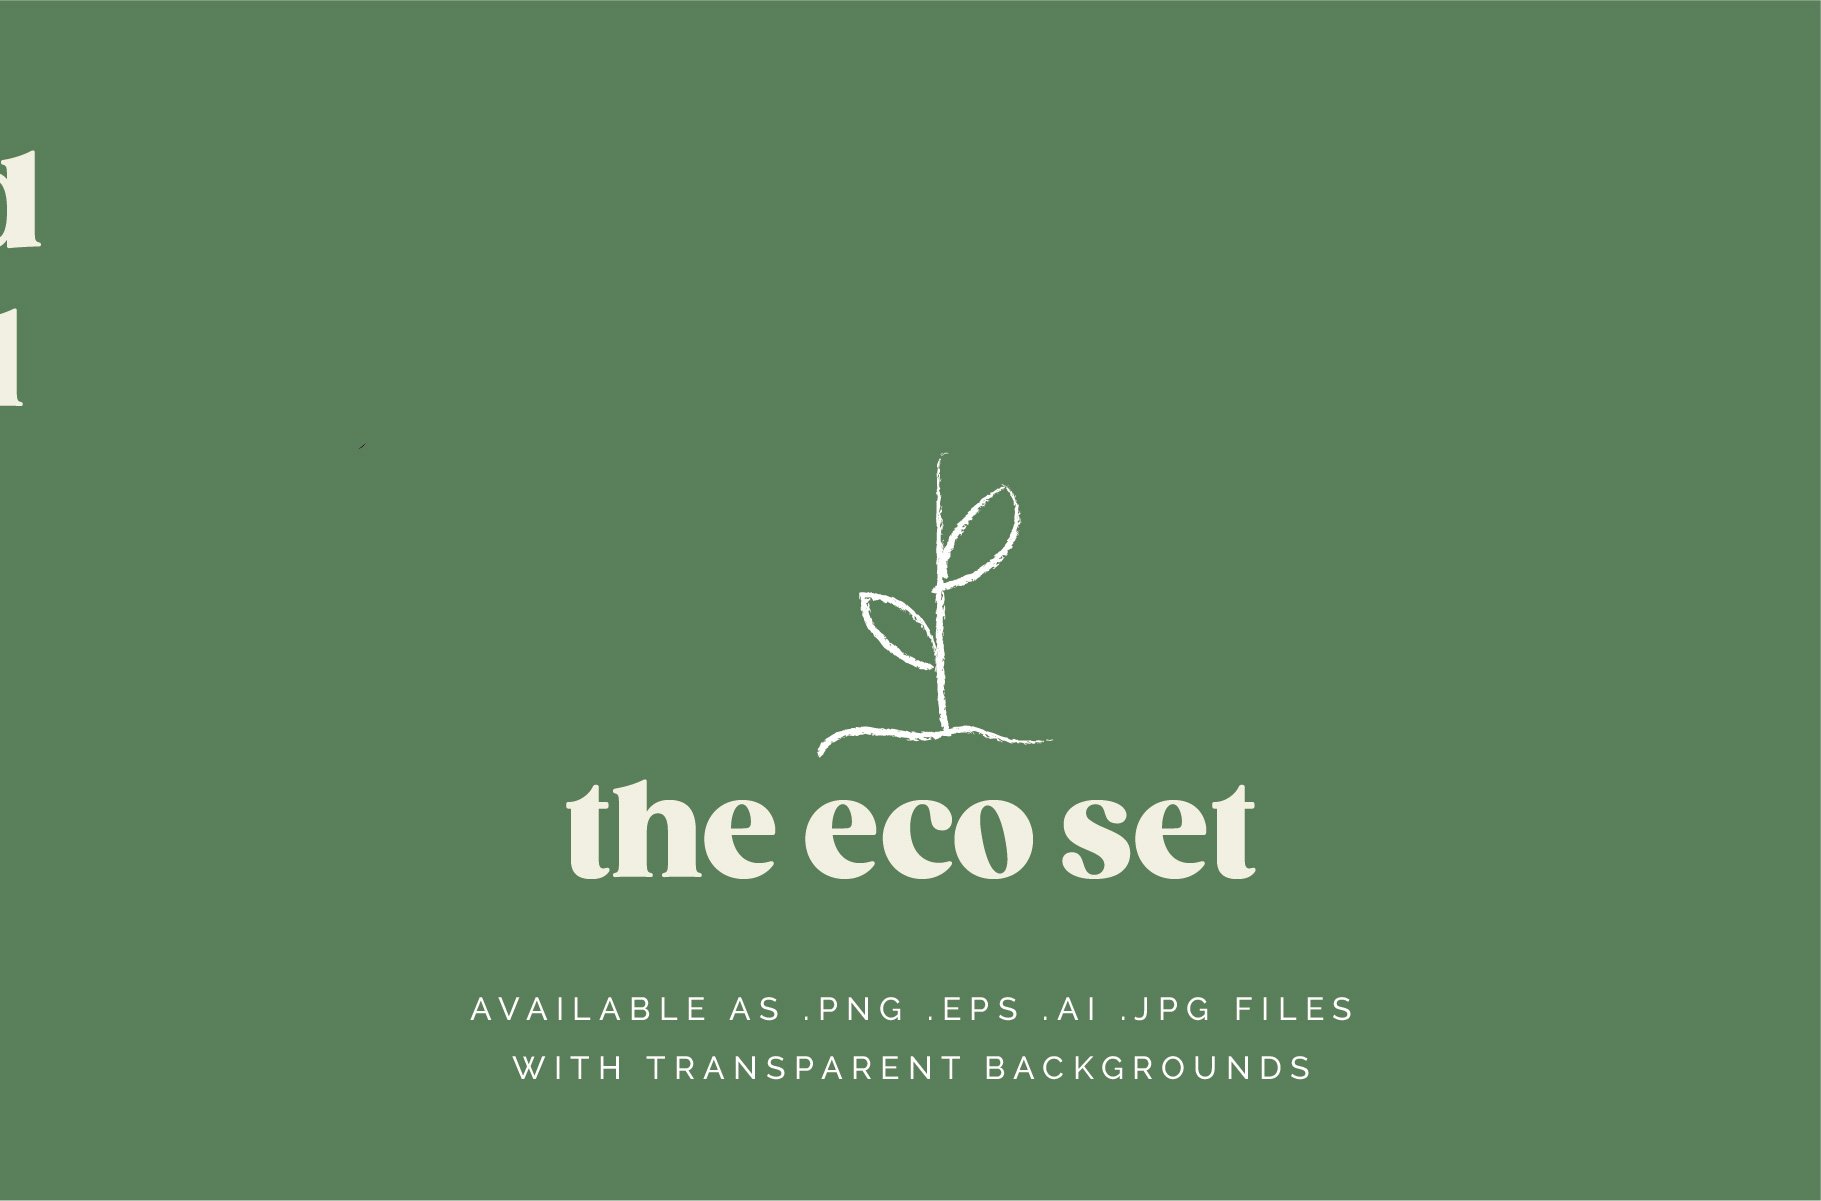 the eco set recovered 08 142